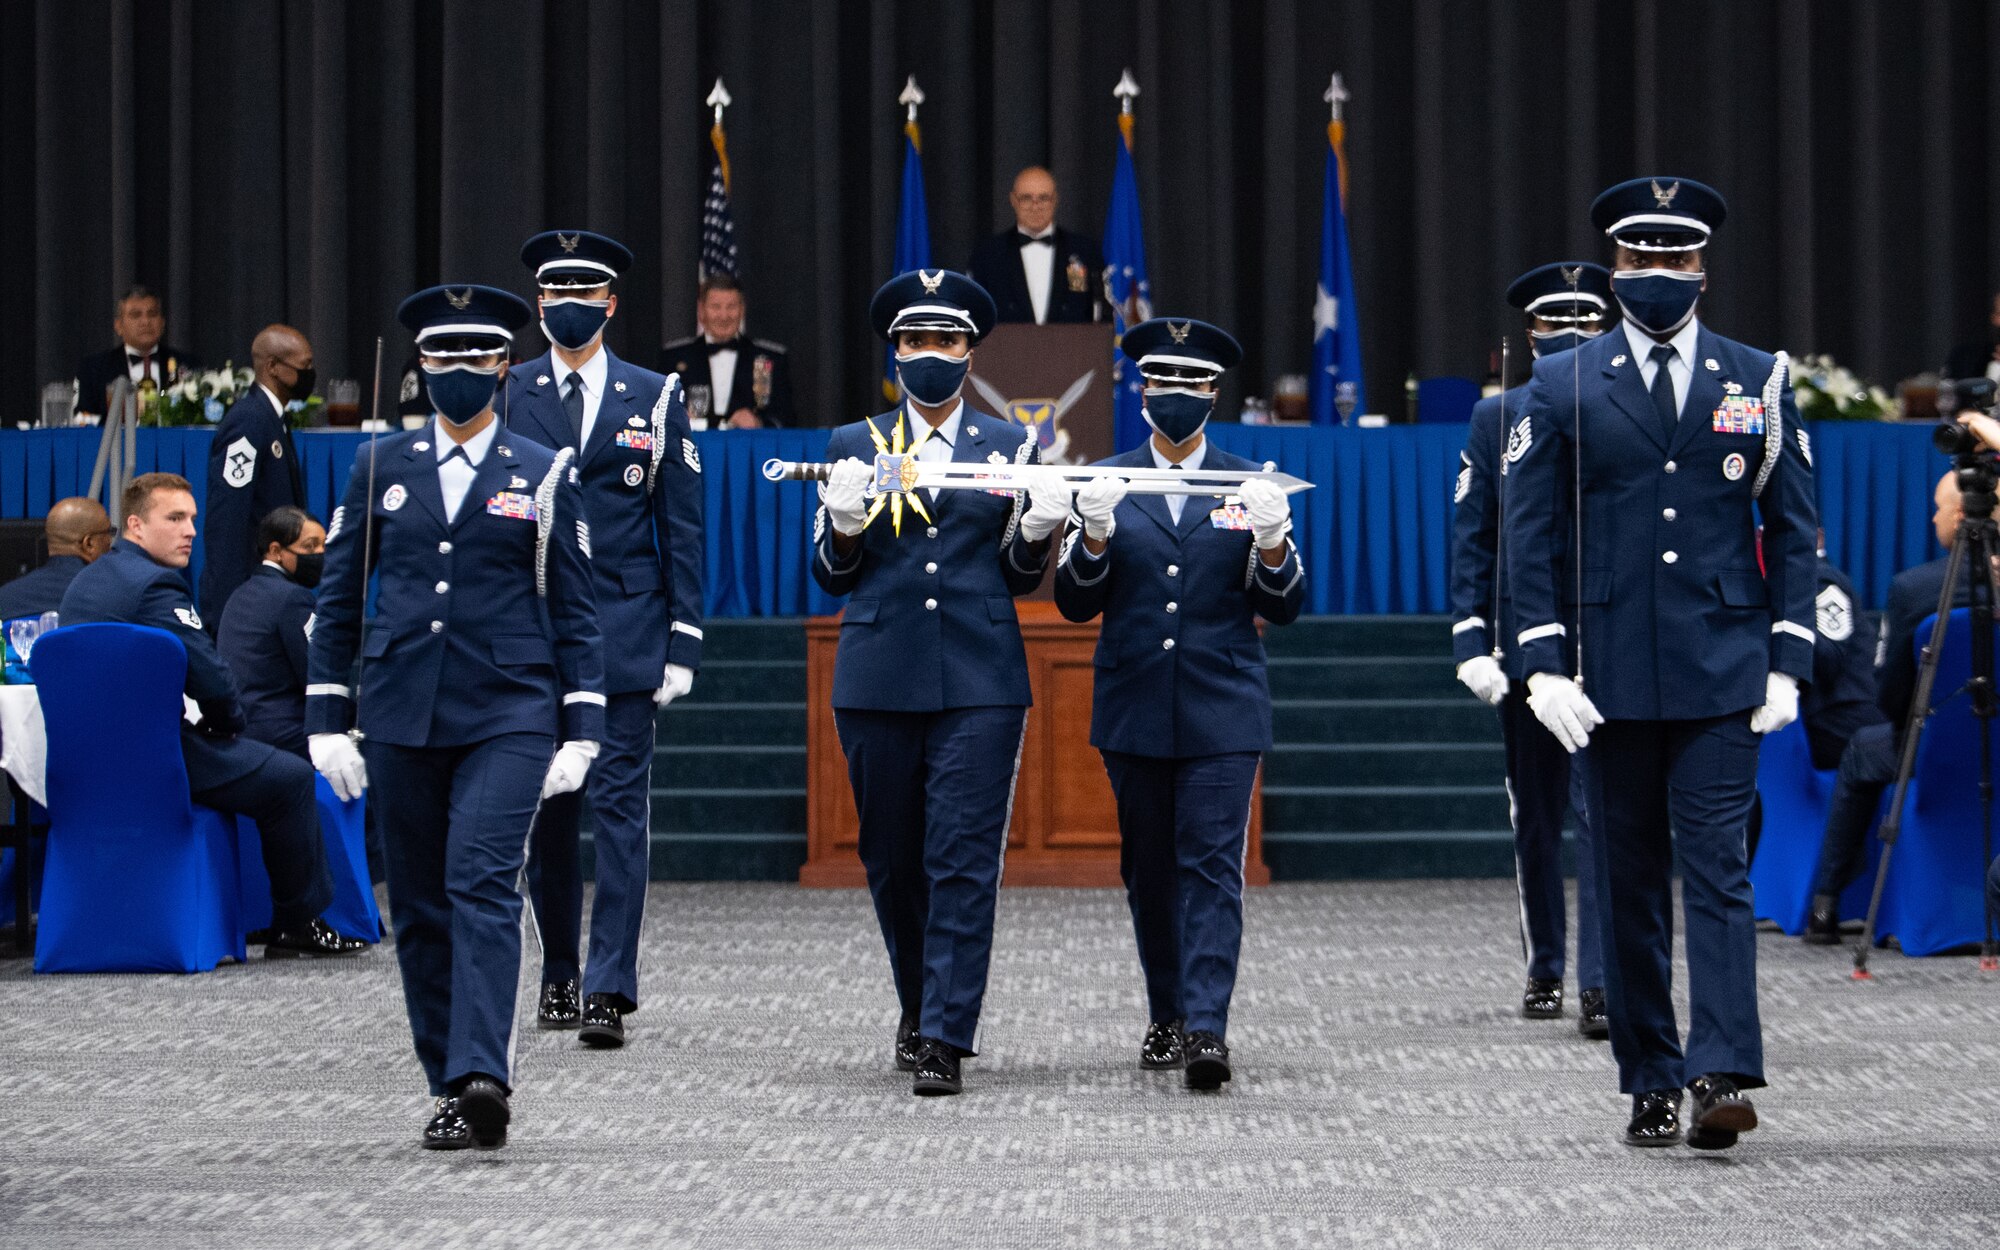 An honor guard detail presents the sword used in the Order of the Sword ceremony